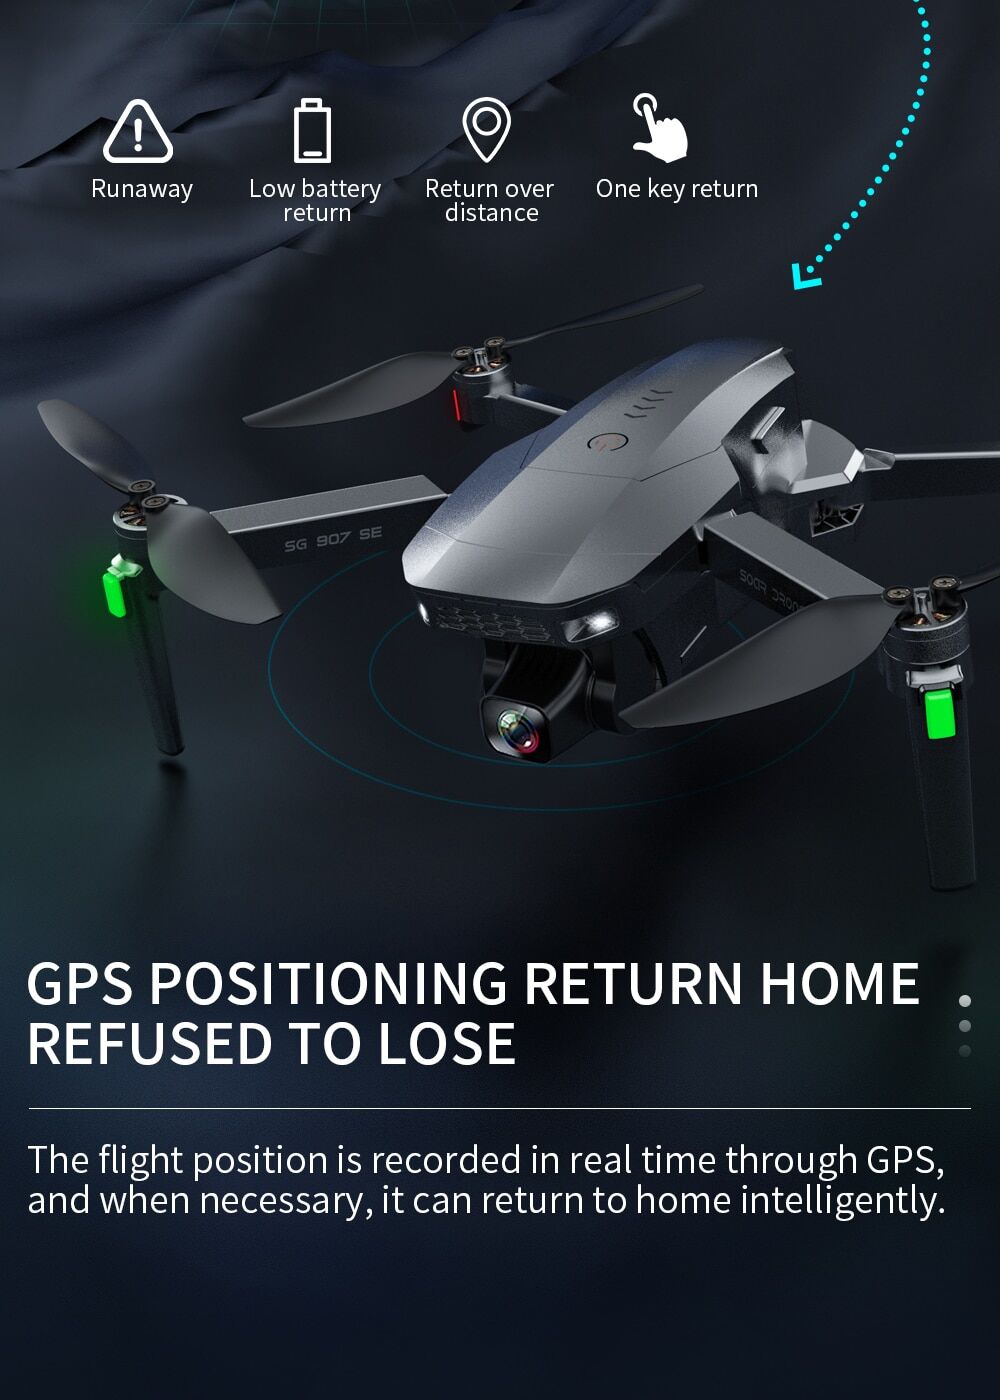 Drones for professional photography SG907 MAX 3-axis 4K camera € 157,09